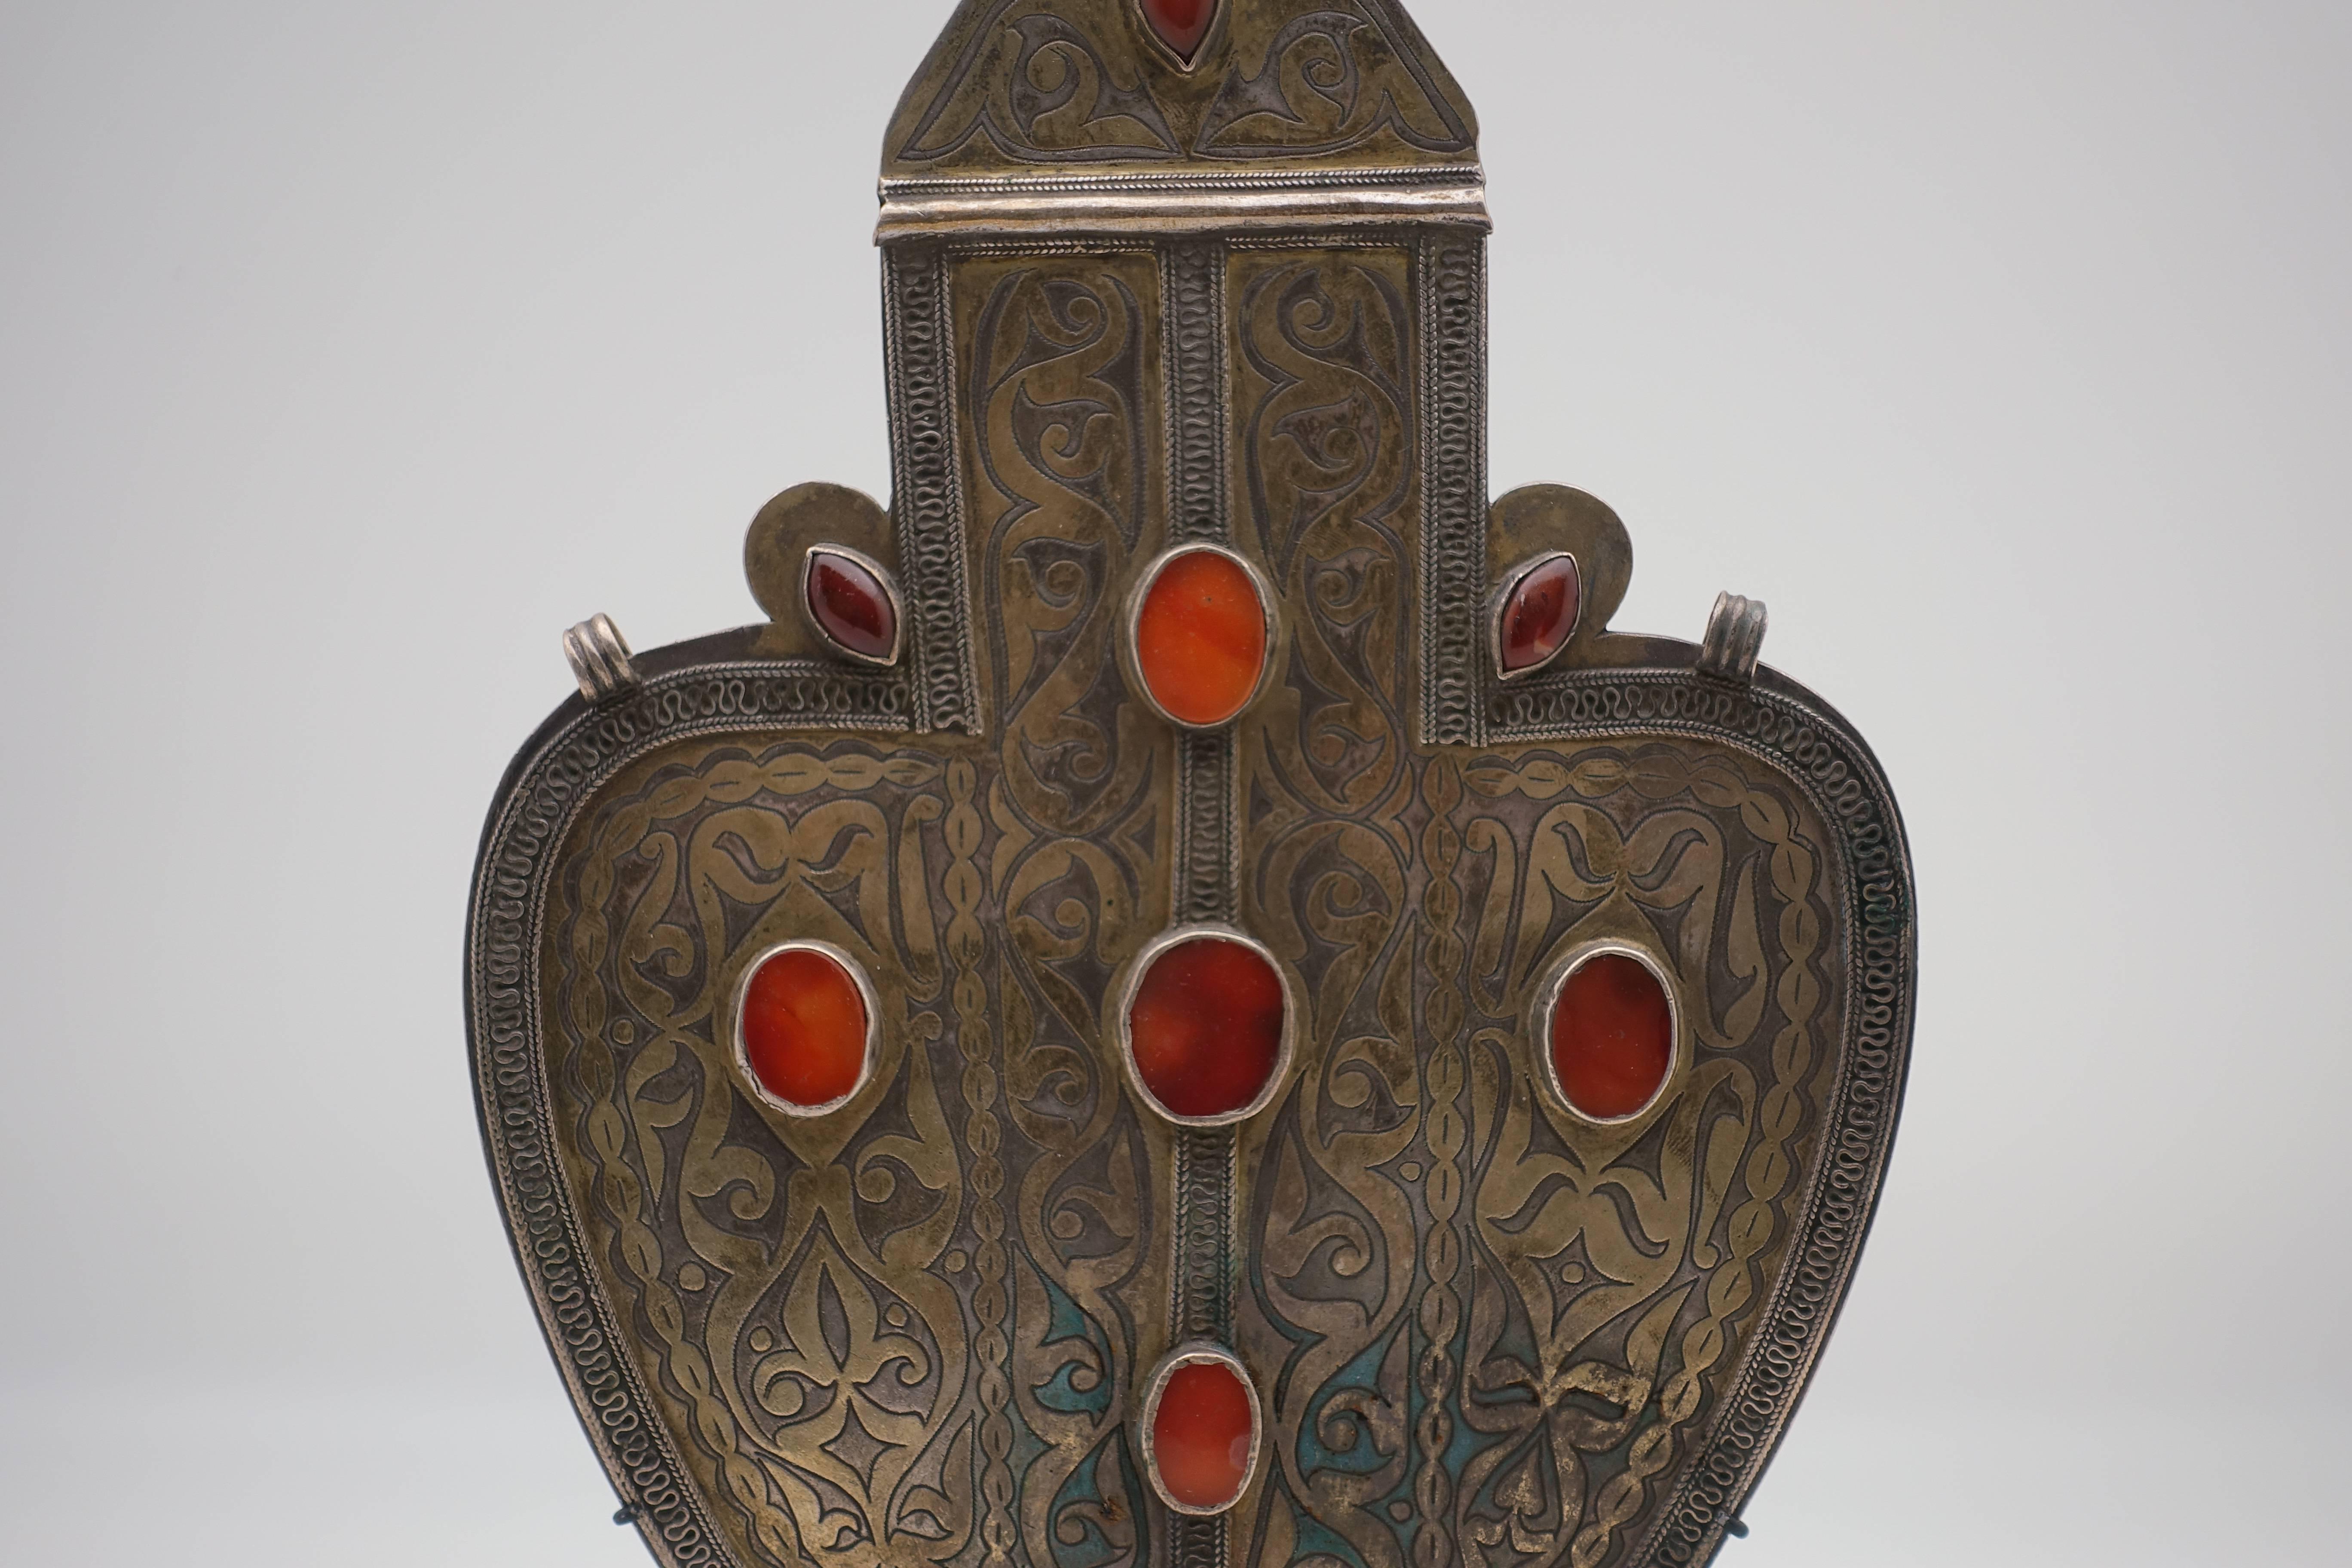 Coin-silver Turkmen heart pendant from Turkmenistan, boarding Afghanistan. Antique silver pendant from the early 1900s. Hand-tooled coin silver with nine carnelian settings, mounted on a custom, black painted metal base.